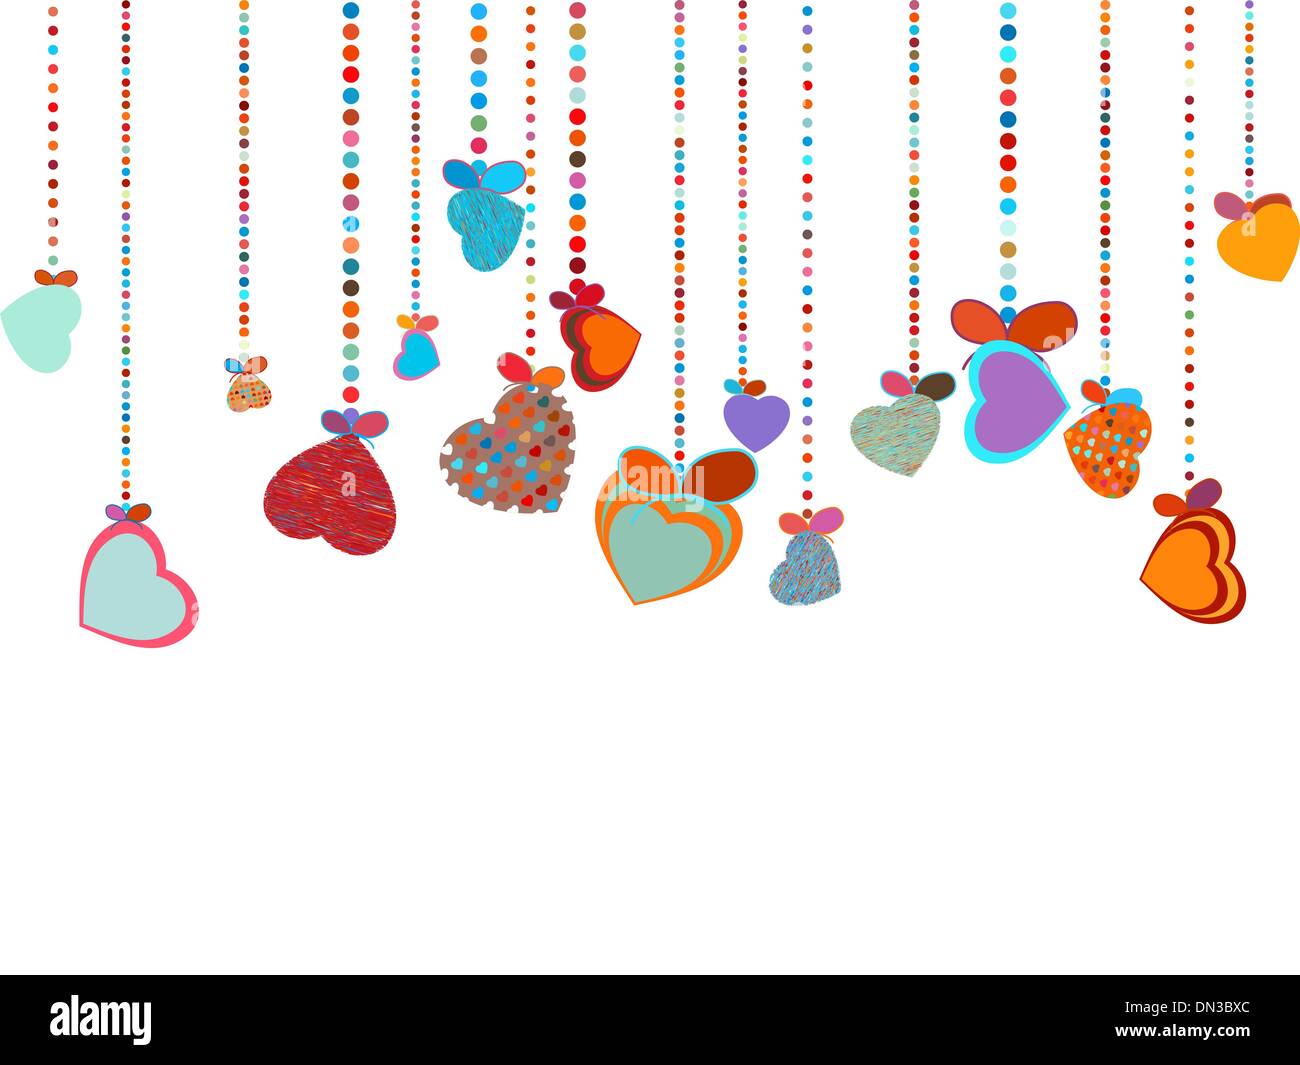 Valentines Day Background. EPS 8 Stock Vector